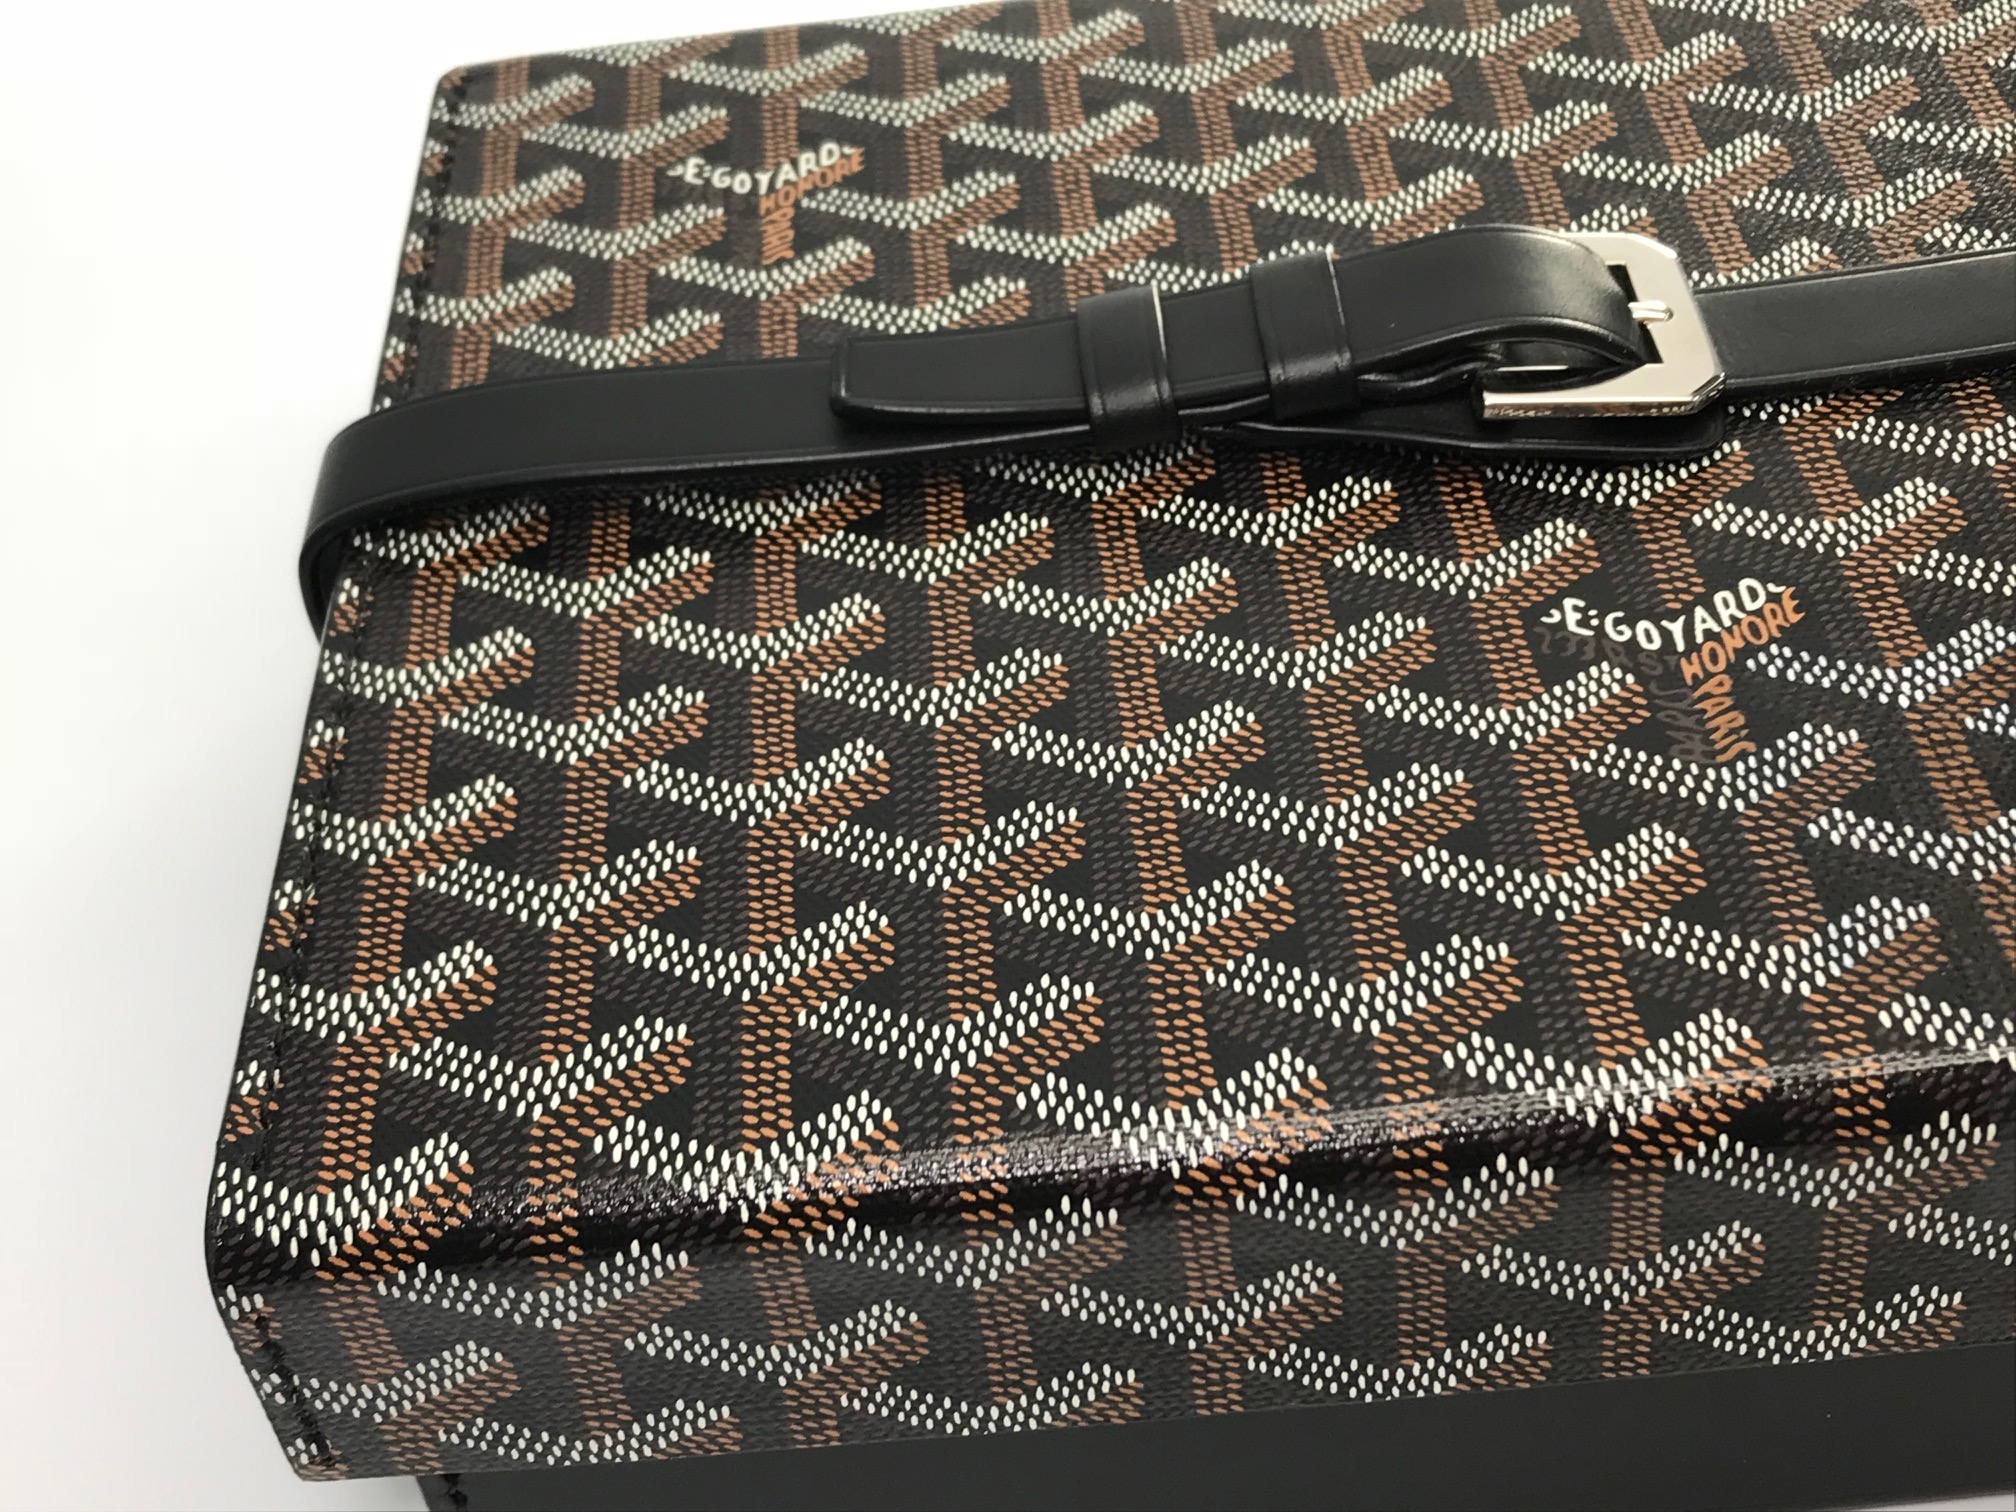 FSOT - Genuine Goyard Black Leather Watch Box for 8 Watches, Omega Forums